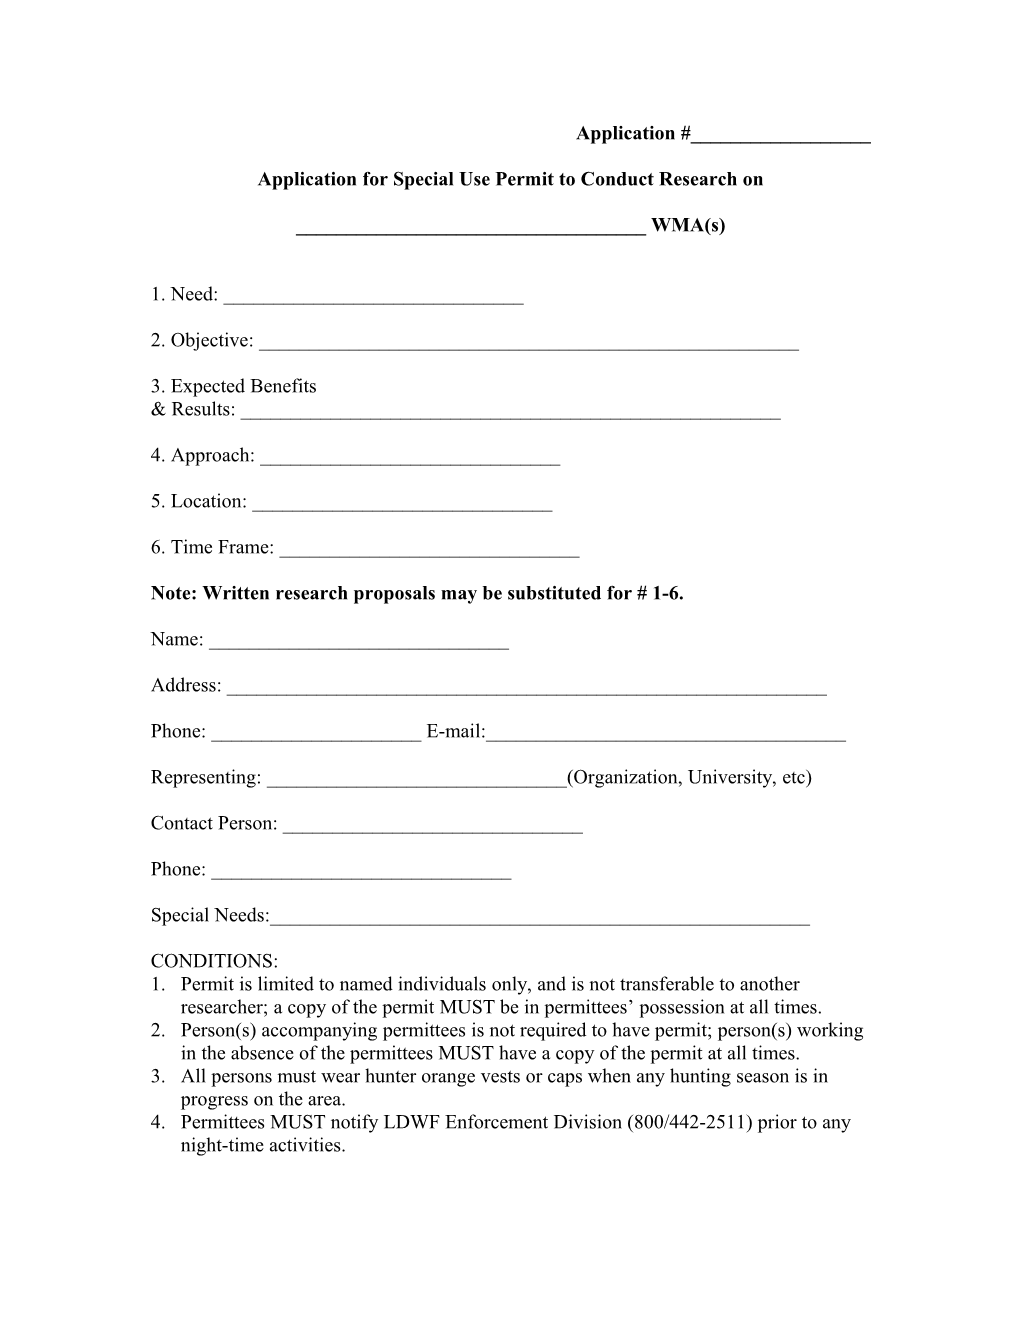 Application for Special Use Permit to Conduct Research On